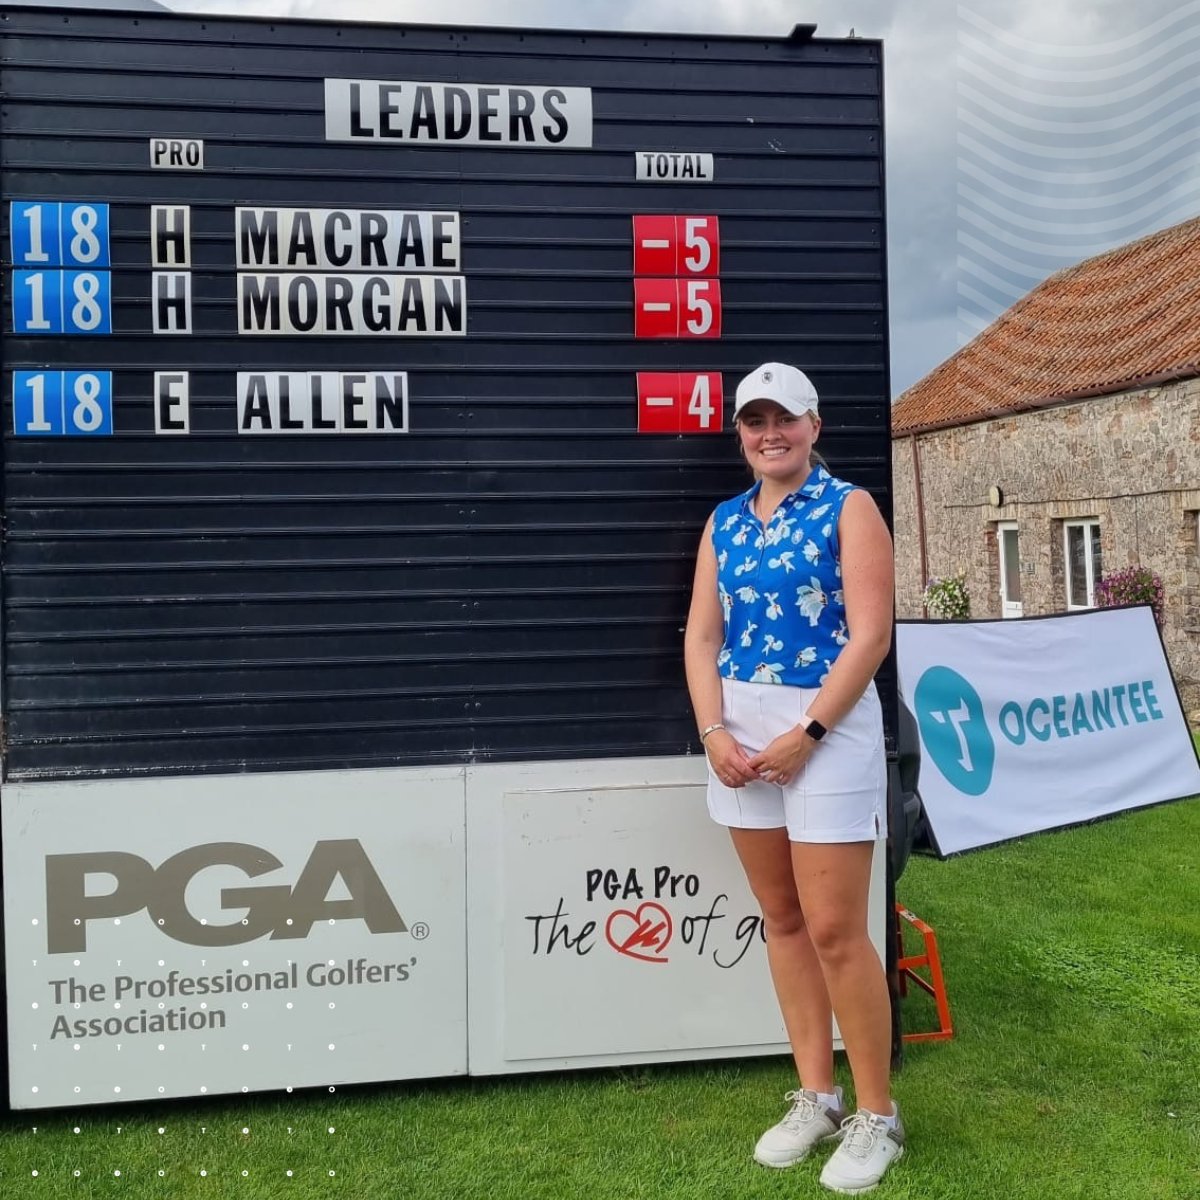 What a spectacular day of golf yesterday with the first 6 golfers coming home under par Taking the top spot and finishing 5 under par was @heathermacgolf & Holly Morgan, with @EmmaCharlotte97 closely behind with 4 under par #oceantee #oceanteewpgaseries